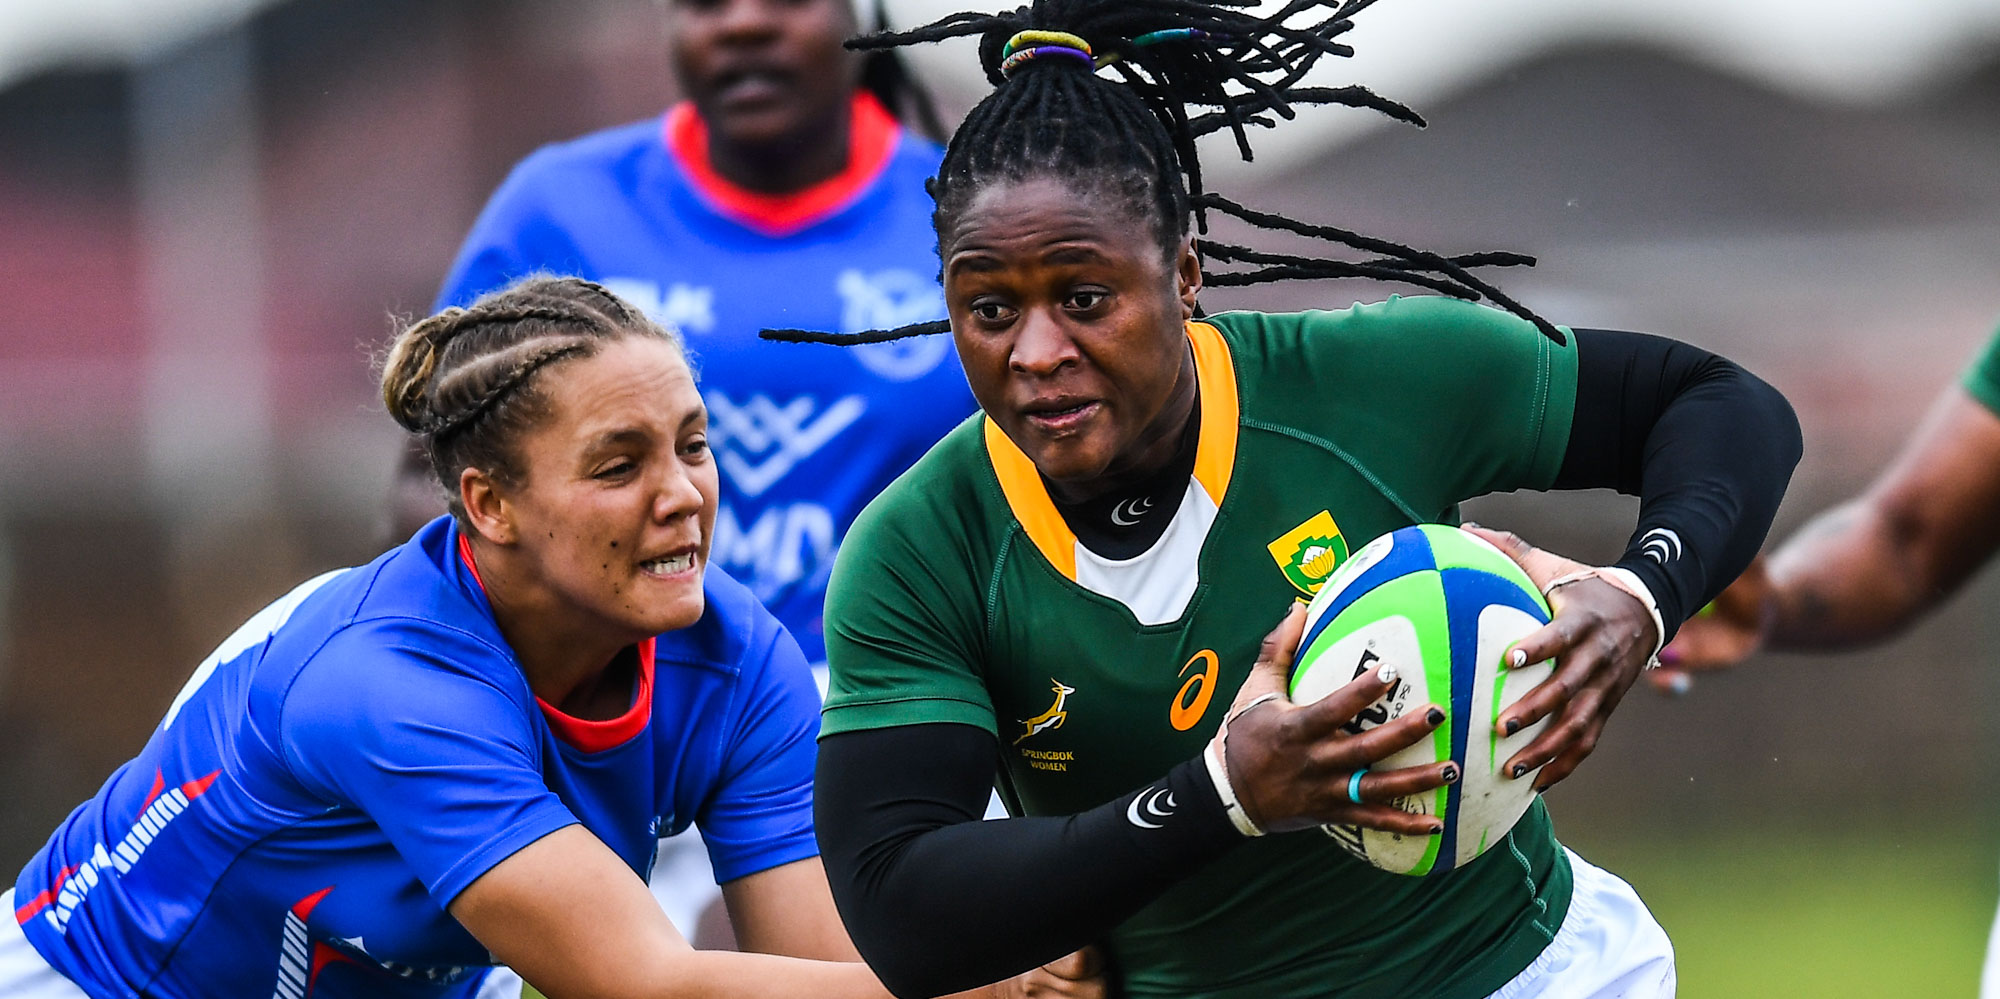 Zintle Mpupha scored three of her four tries in the first half.